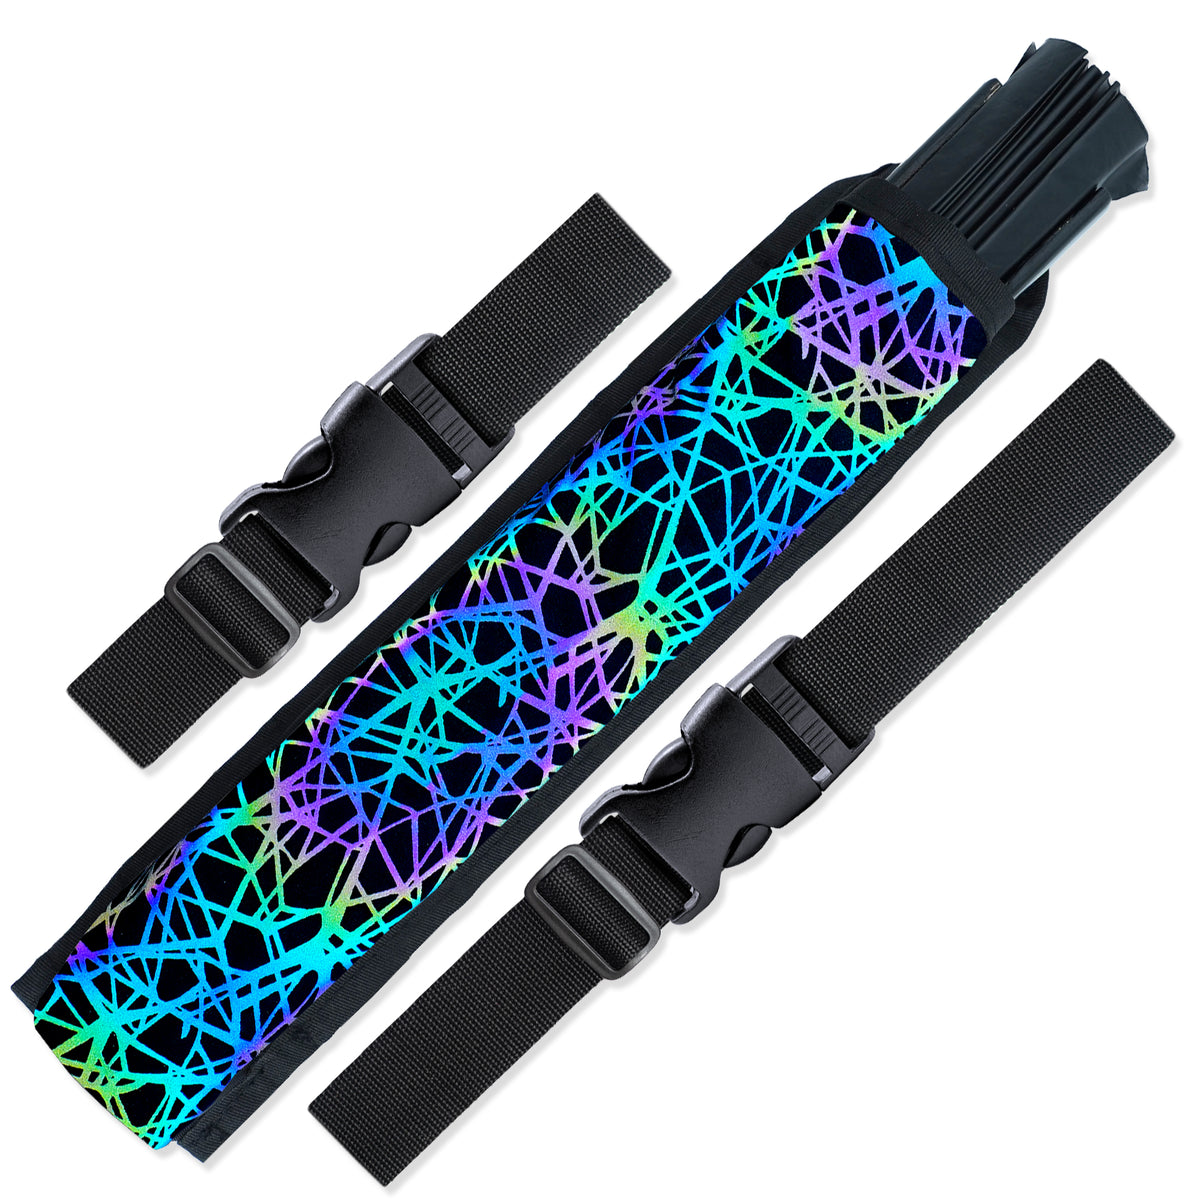 Rave Fan Holster - Rave Fan Holder - Rave Festival Accessories | Hand Fan Holder & Thigh Holster for Rave Essentials- Web - Reflective